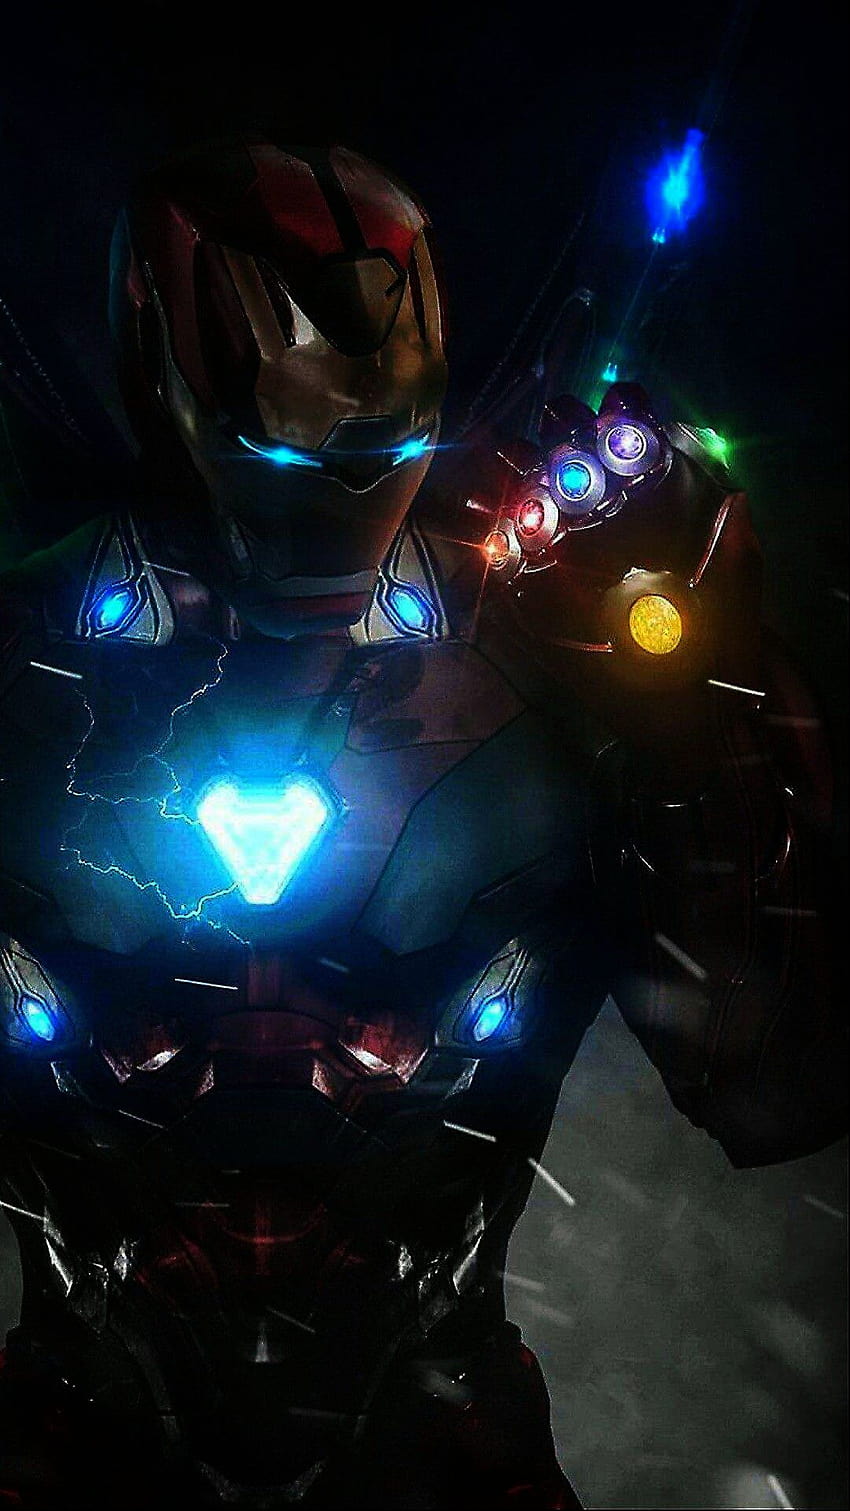 Live Iphone Xs Max Not Working though Good For Iphone 8 Plus both Wallpap…, avengers live HD phone wallpaper